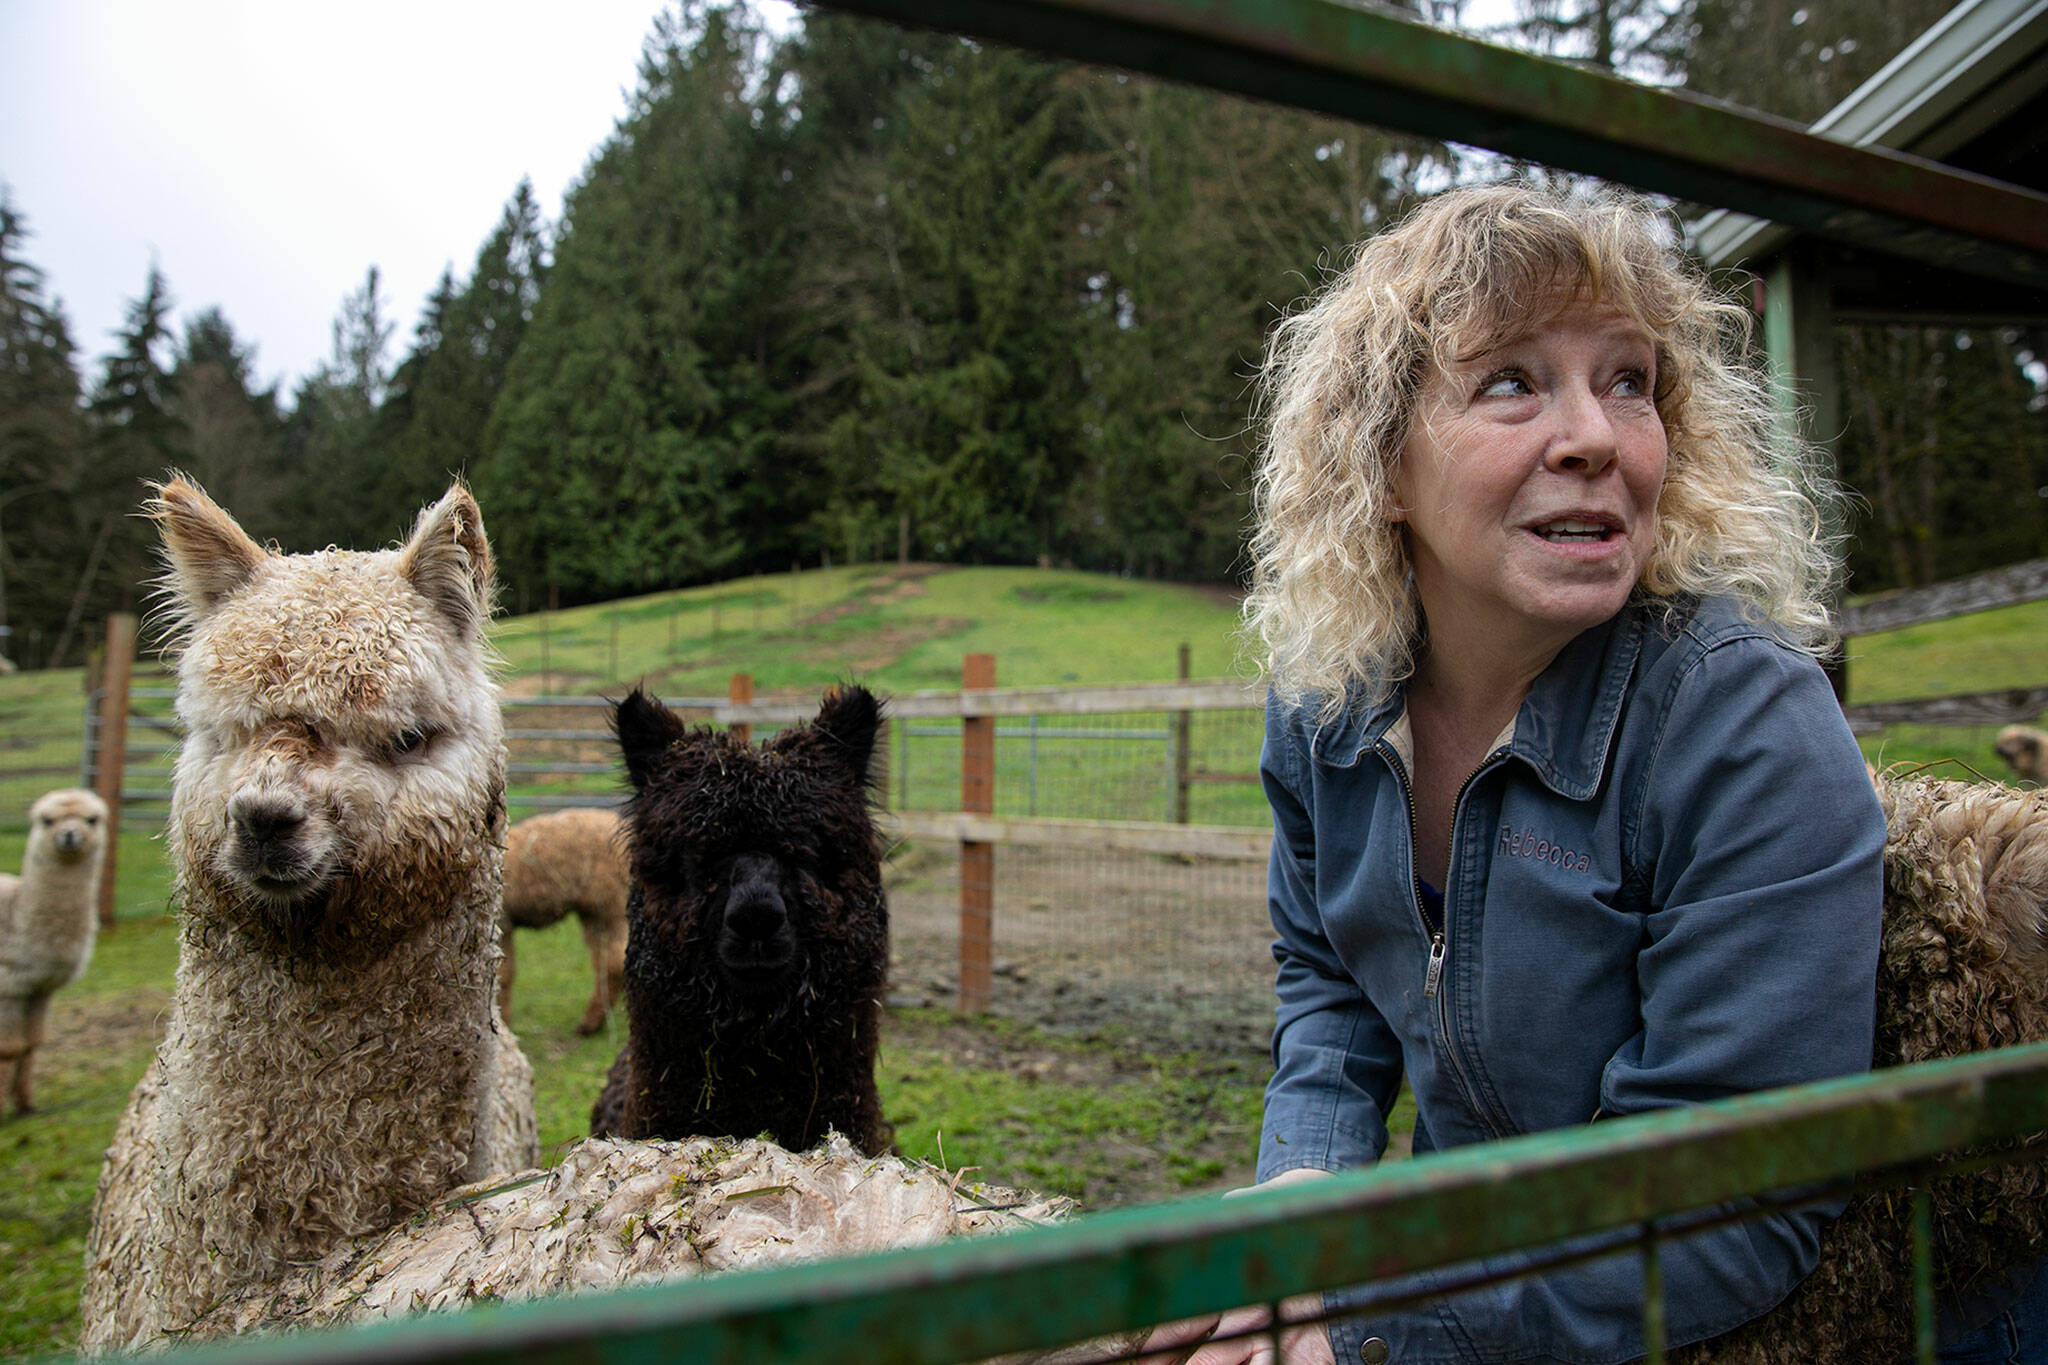 Rebecca Suryan, an alpaca breeder of over 20 years, gets in the pen with some of her younger male animals Monday, March 28, 2022, at Alpacas from MaRS in Snohomish, Washington. Males and females are kept separate because unlike most animals, they do not have a breeding season and will reproduce any time of the year if left together. The alpacas are herd animals, so they are kept in groups of three or more on the farm. (Ryan Berry / The Herald)